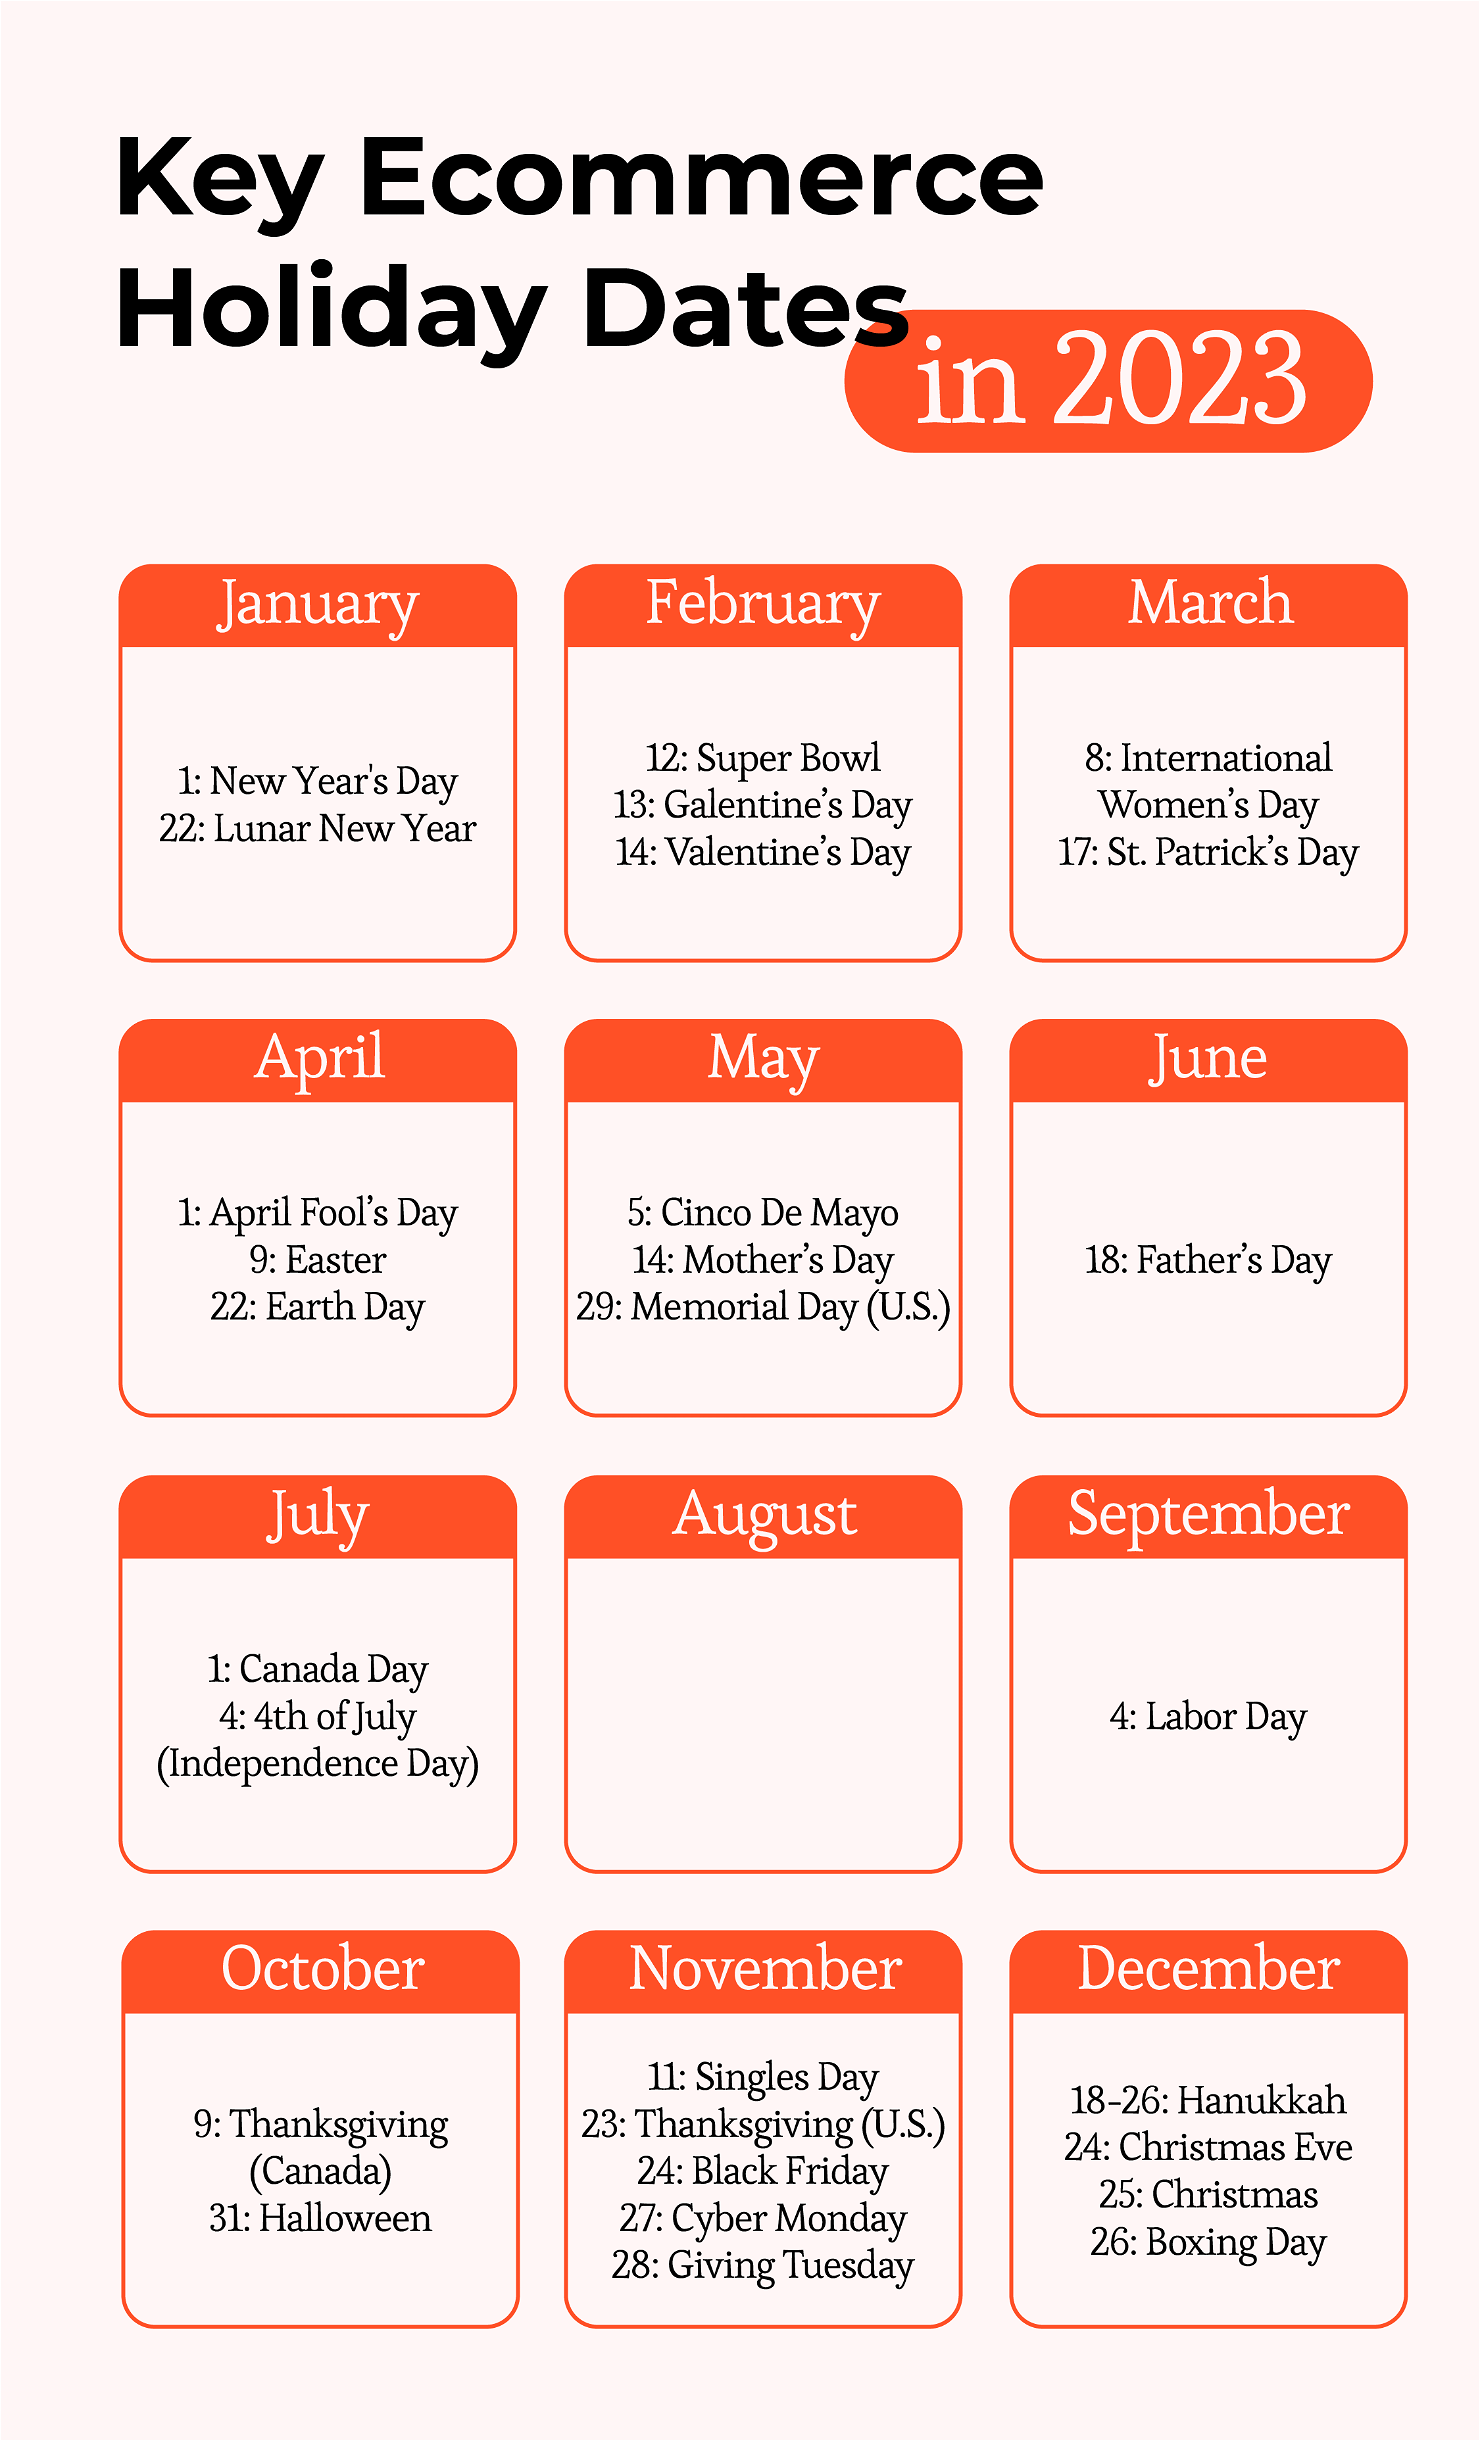 Holidays Plan Your Marketing Calendar For These Key Dates In